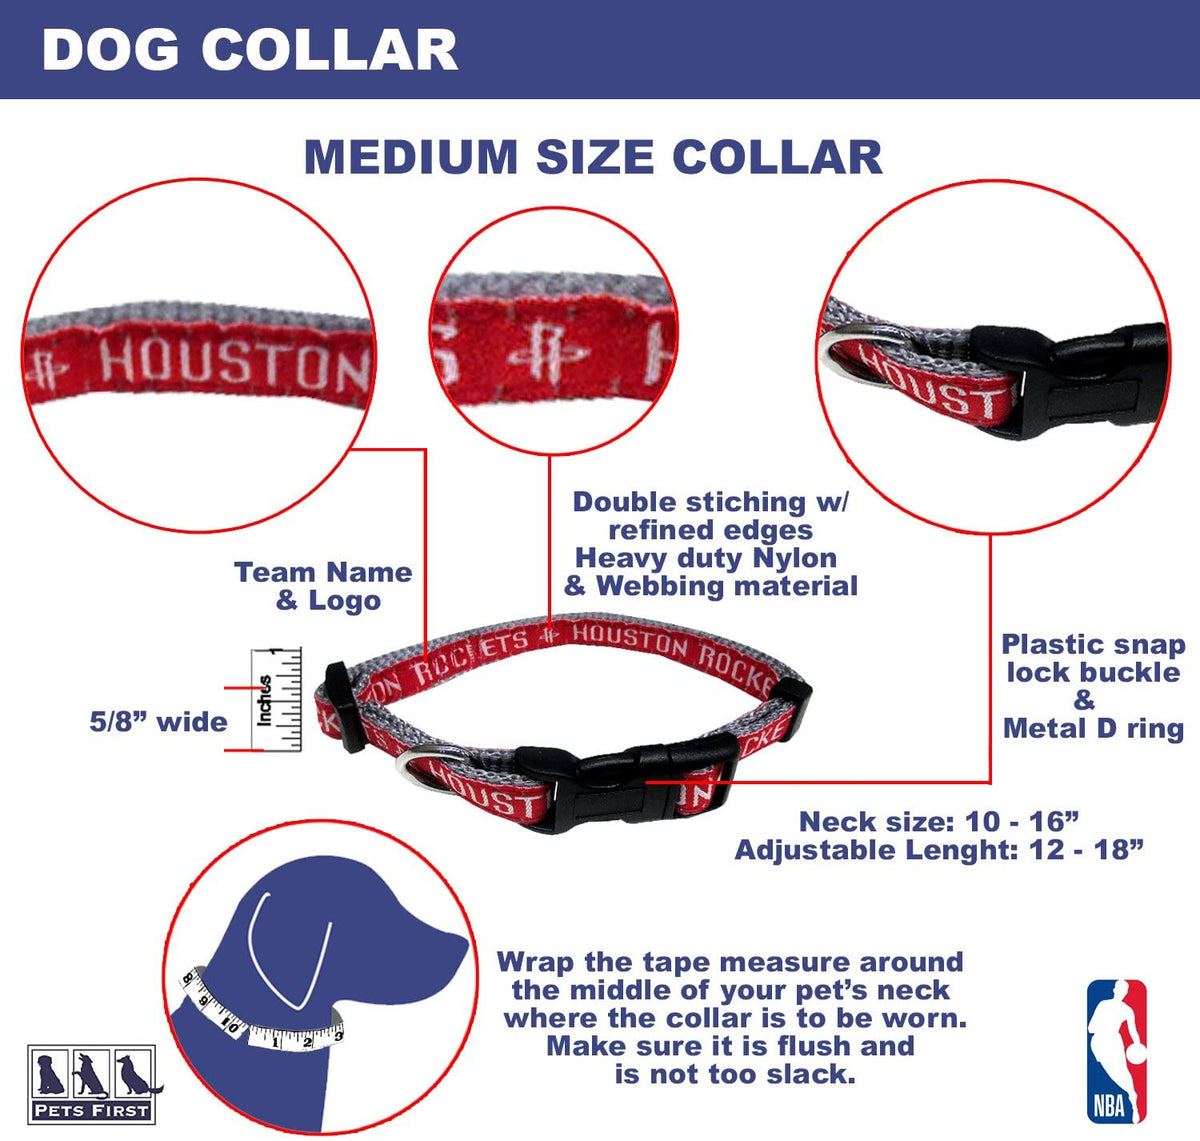 Houston Rockets Dog Collar and Leash - 3 Red Rovers